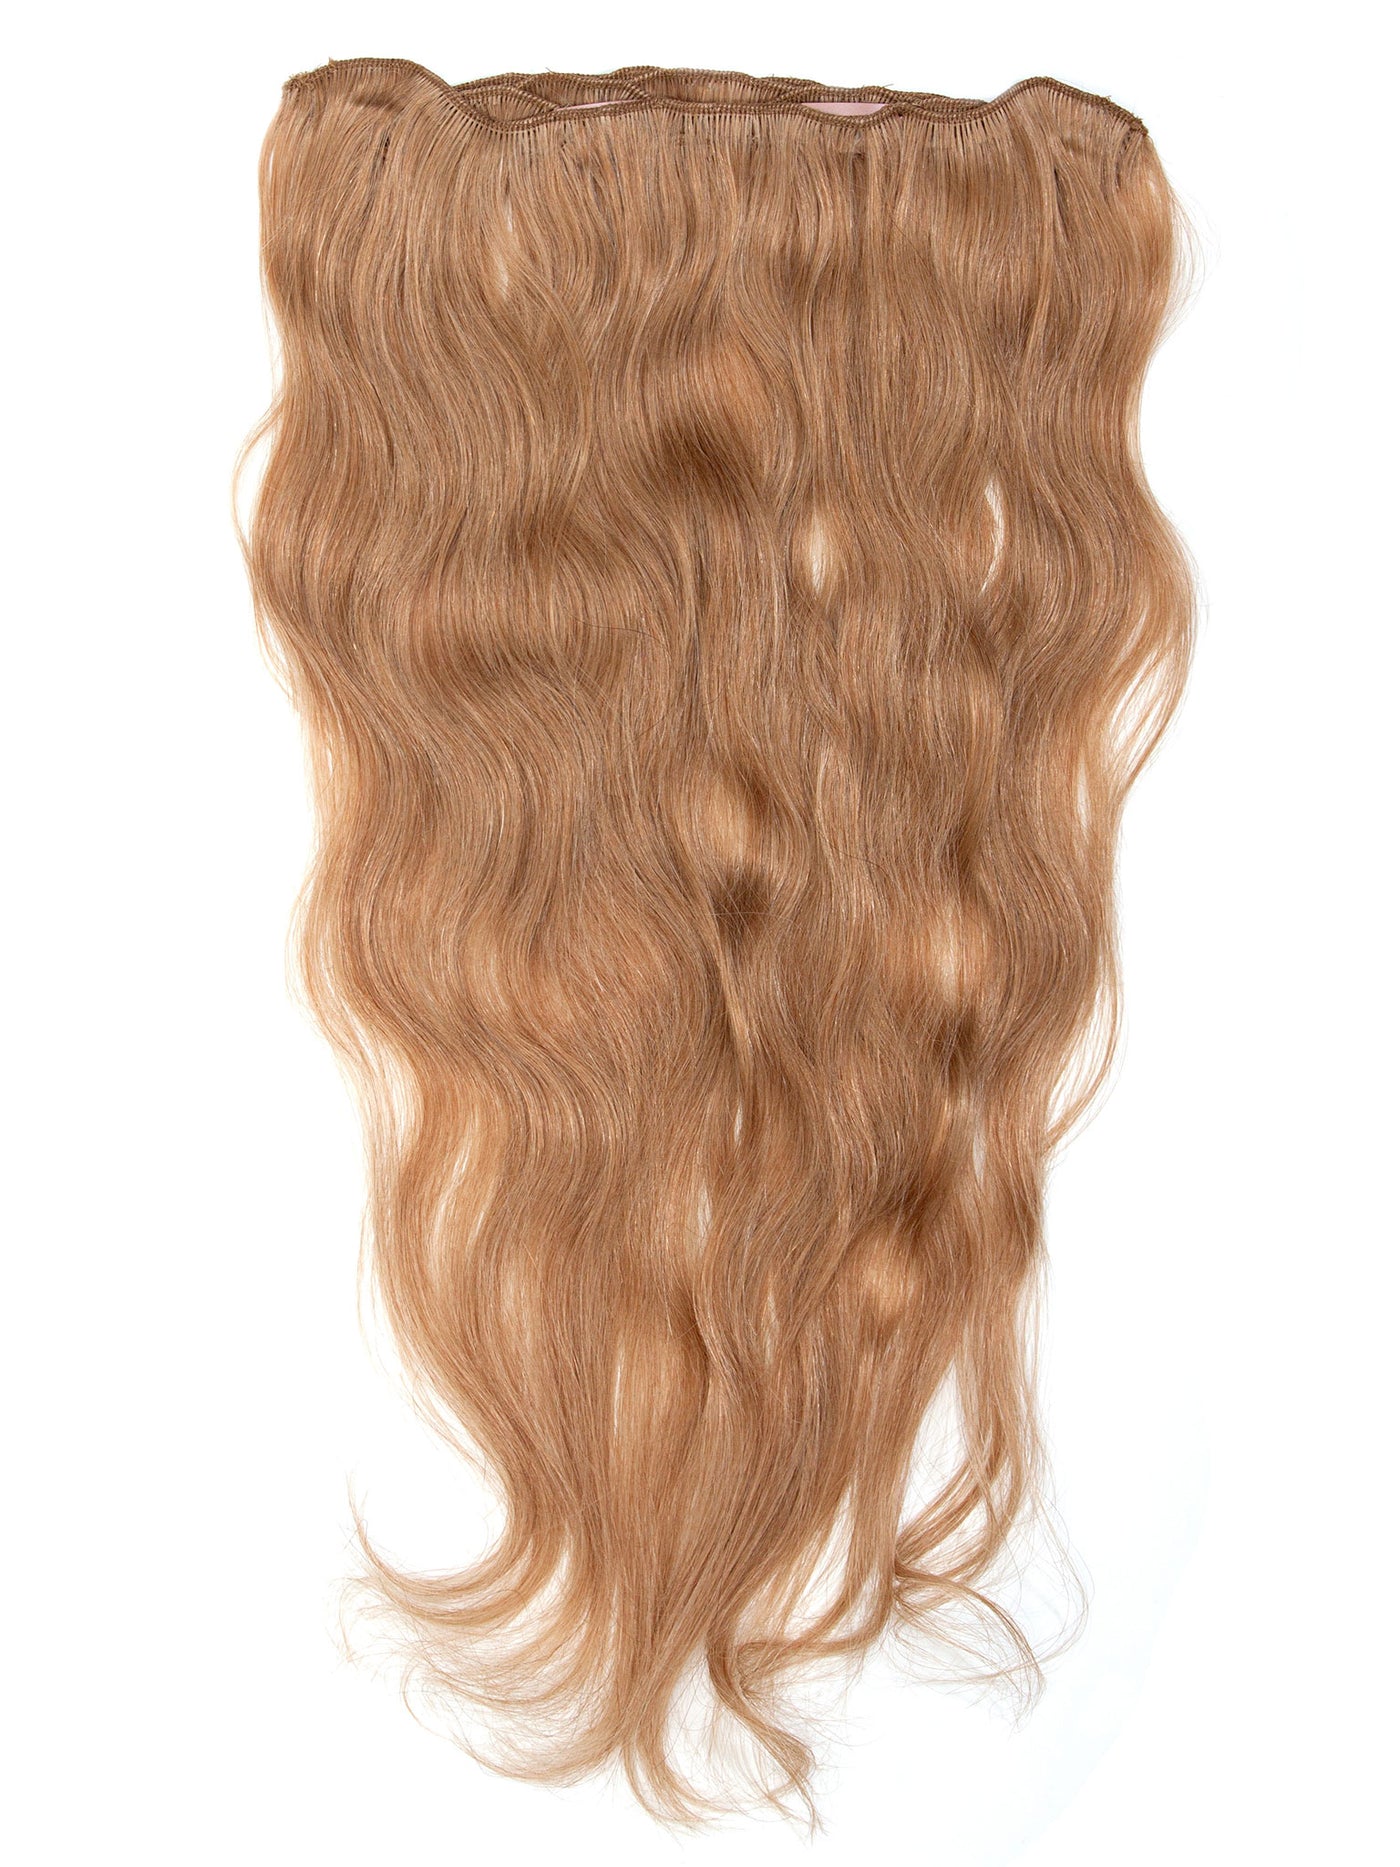 Color 27 Studio Fishnet Clip In Hair Extensions